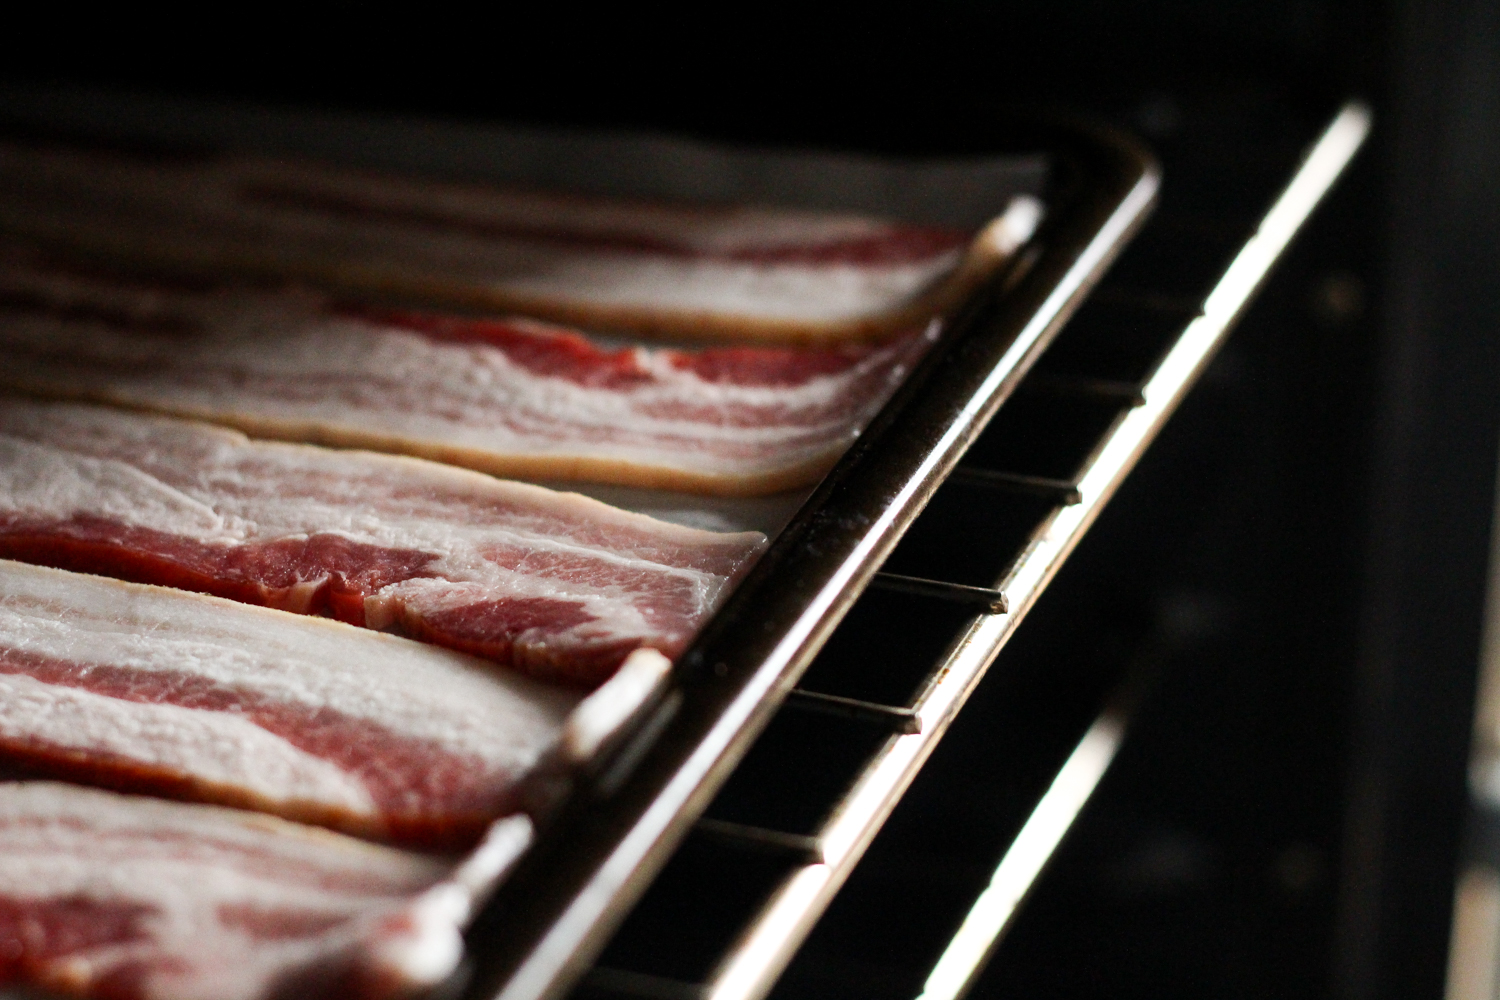 How To Cook Bacon In The Oven Without Preheating Worthy Pause,Chameleon Petco